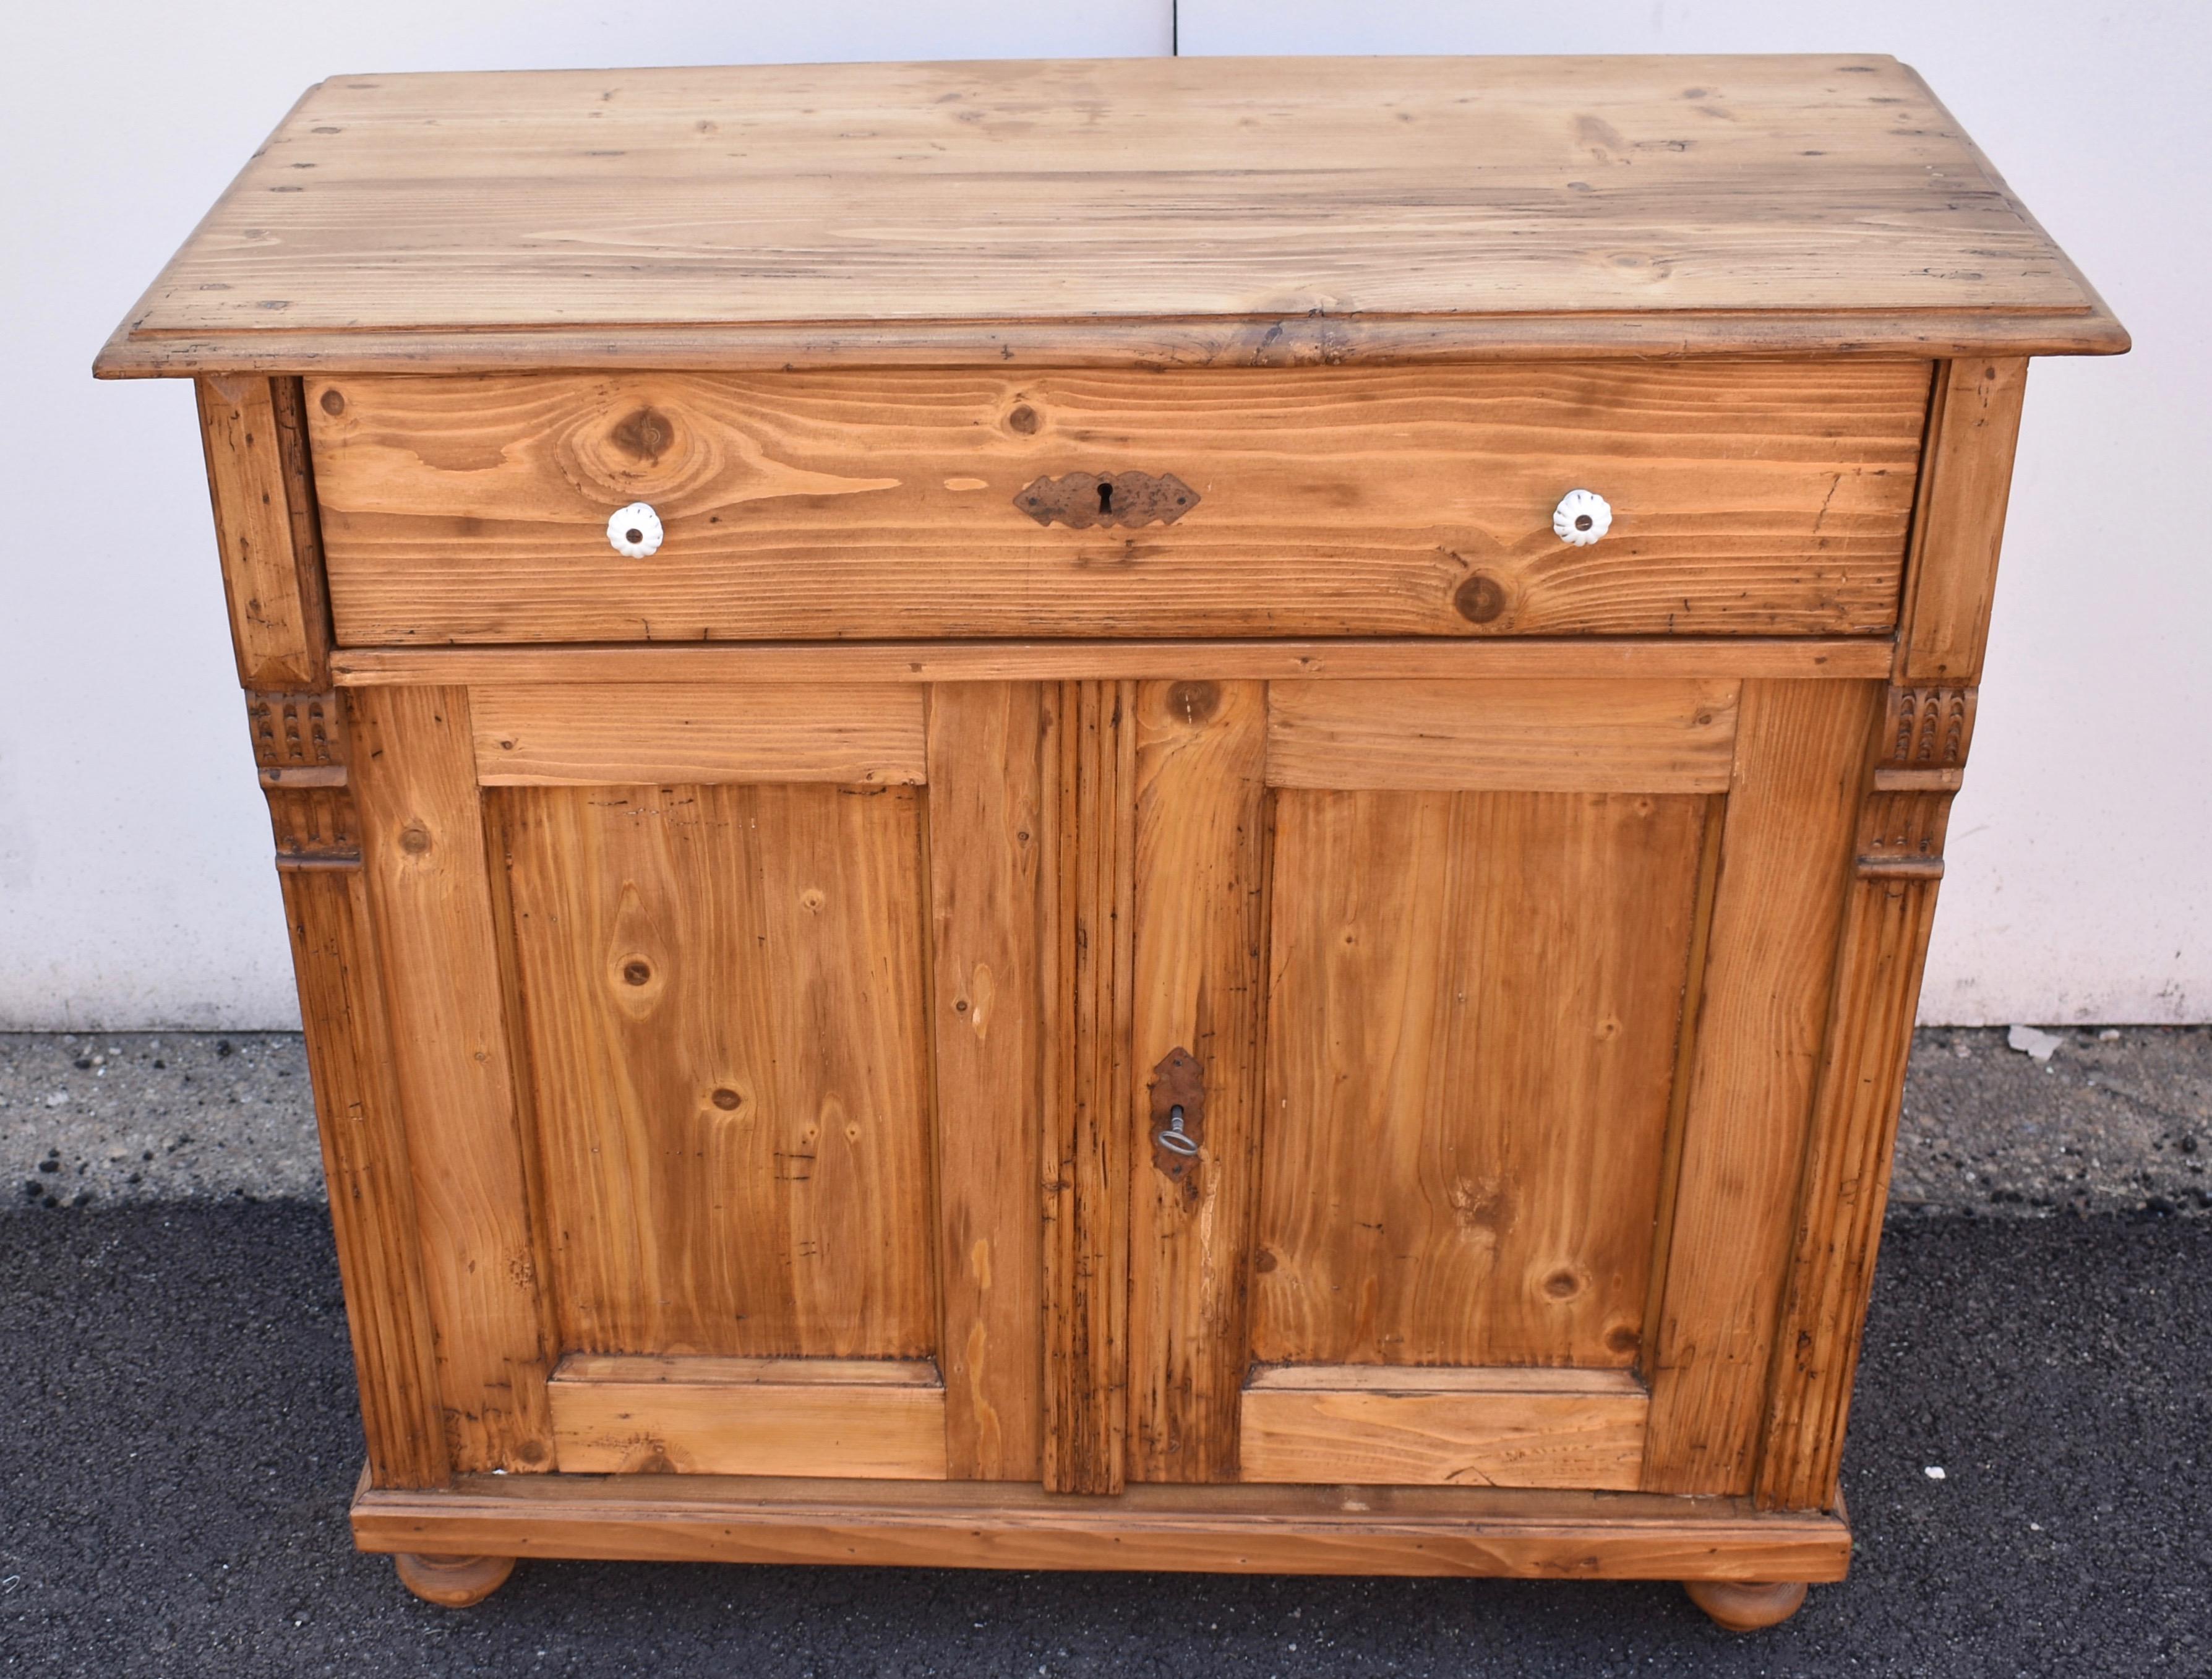 This sturdy and versatile dresser base has a step-down edge to the top, above a single long hand-cut dovetailed drawer. The two door frames have a nicely chamfered inside edge and enclose flat panels. The front corners have reeded molding and carved